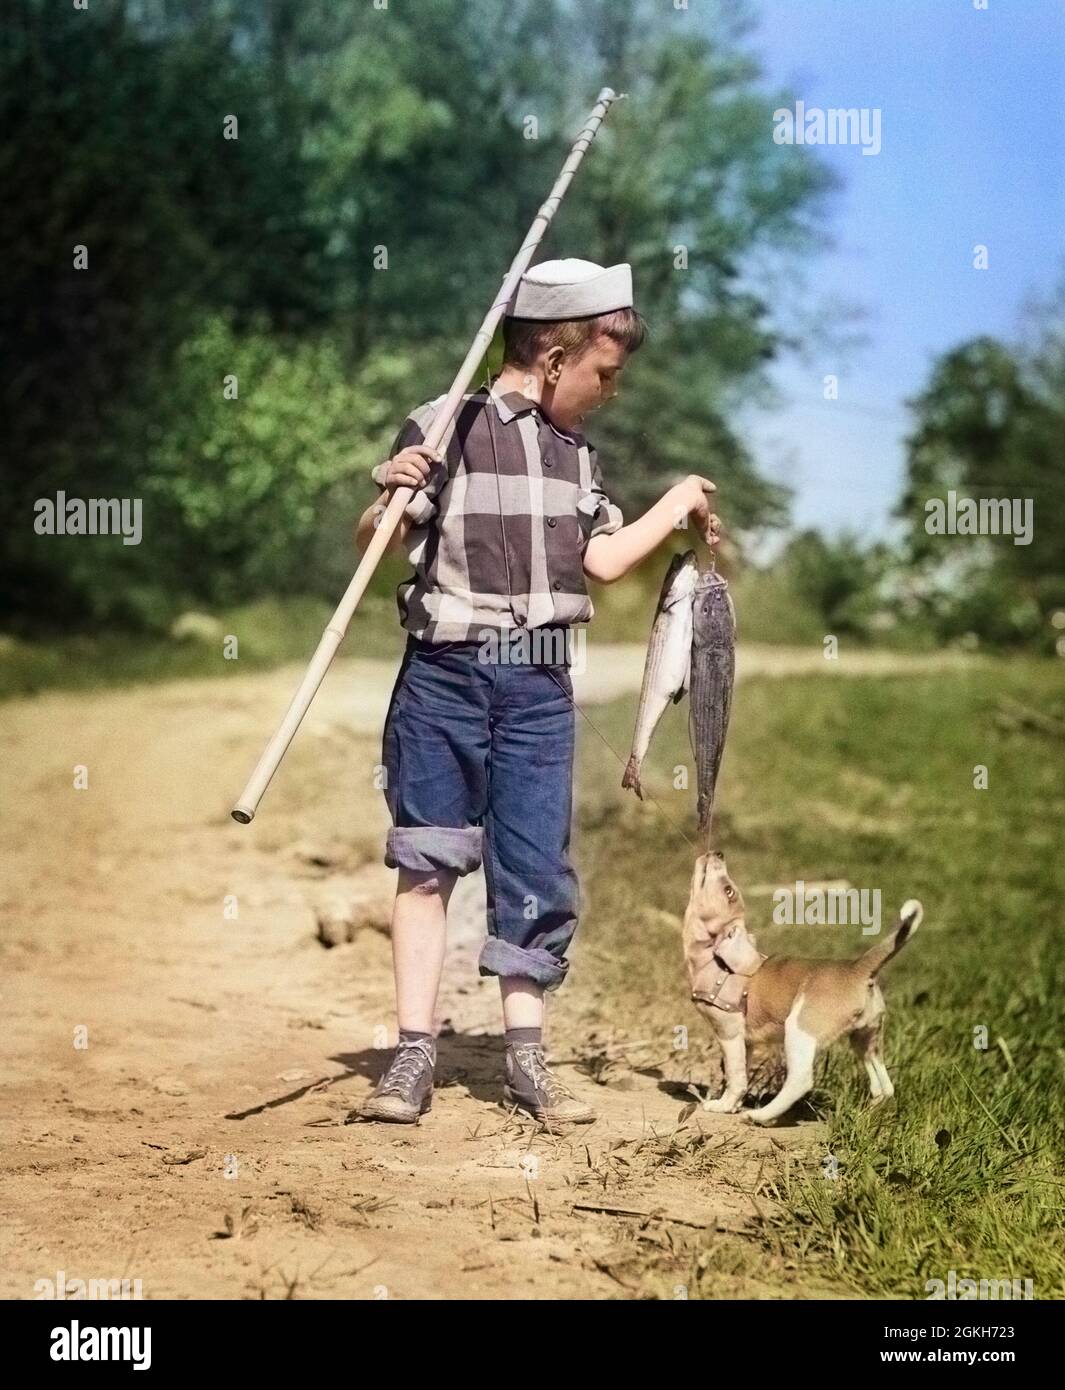 https://c8.alamy.com/comp/2GKH723/1950s-boy-plaid-shirt-sailor-hat-fishing-pole-dog-pulling-on-tail-of-caught-fish-a2814c-deb001-hars-sailor-rural-copy-space-catch-full-length-persons-males-plaid-tail-sneakers-denim-bw-preteen-boy-mammals-adventure-canines-laces-recreation-caught-preteen-recreation-fishing-pant-angling-deb001-rolled-up-blue-jeans-canine-juveniles-mammal-pre-teen-pre-teen-boy-youngster-black-and-white-caucasian-ethnicity-old-fashioned-2GKH723.jpg